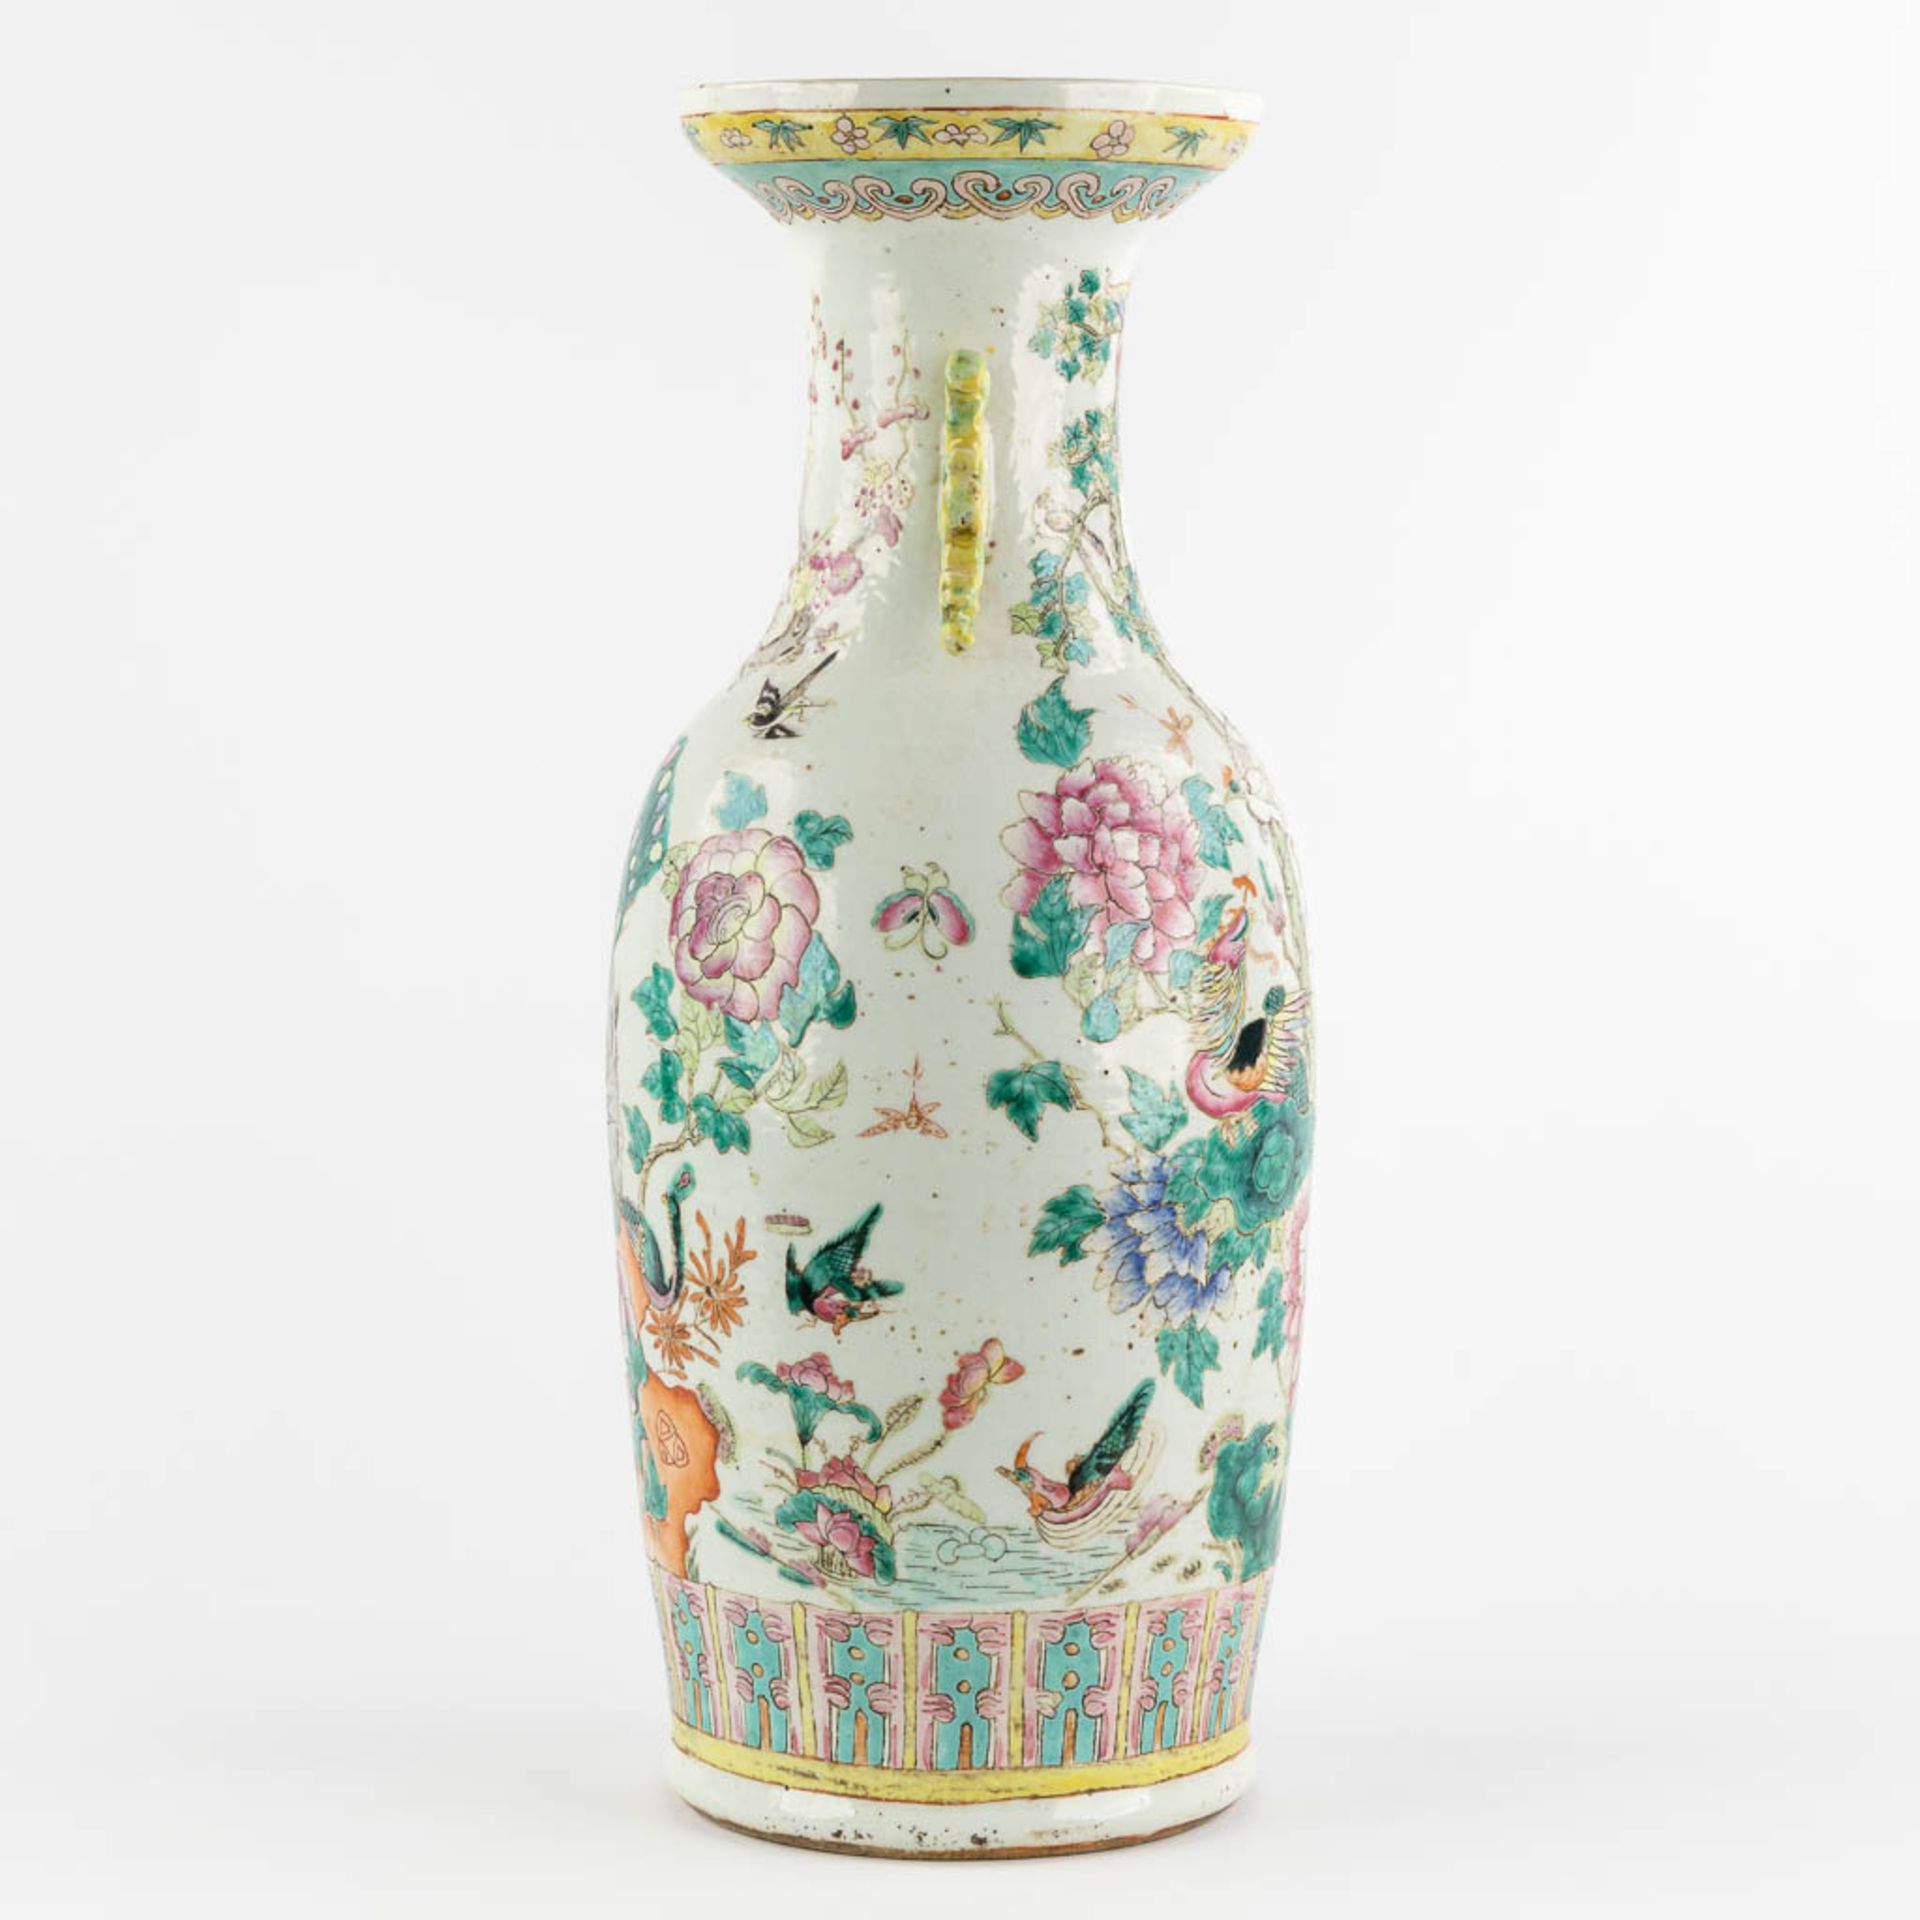 A Chinese Vase, Famille Rose decorated with Fauna and Flora. (H:60 x D:25 cm) - Image 4 of 12